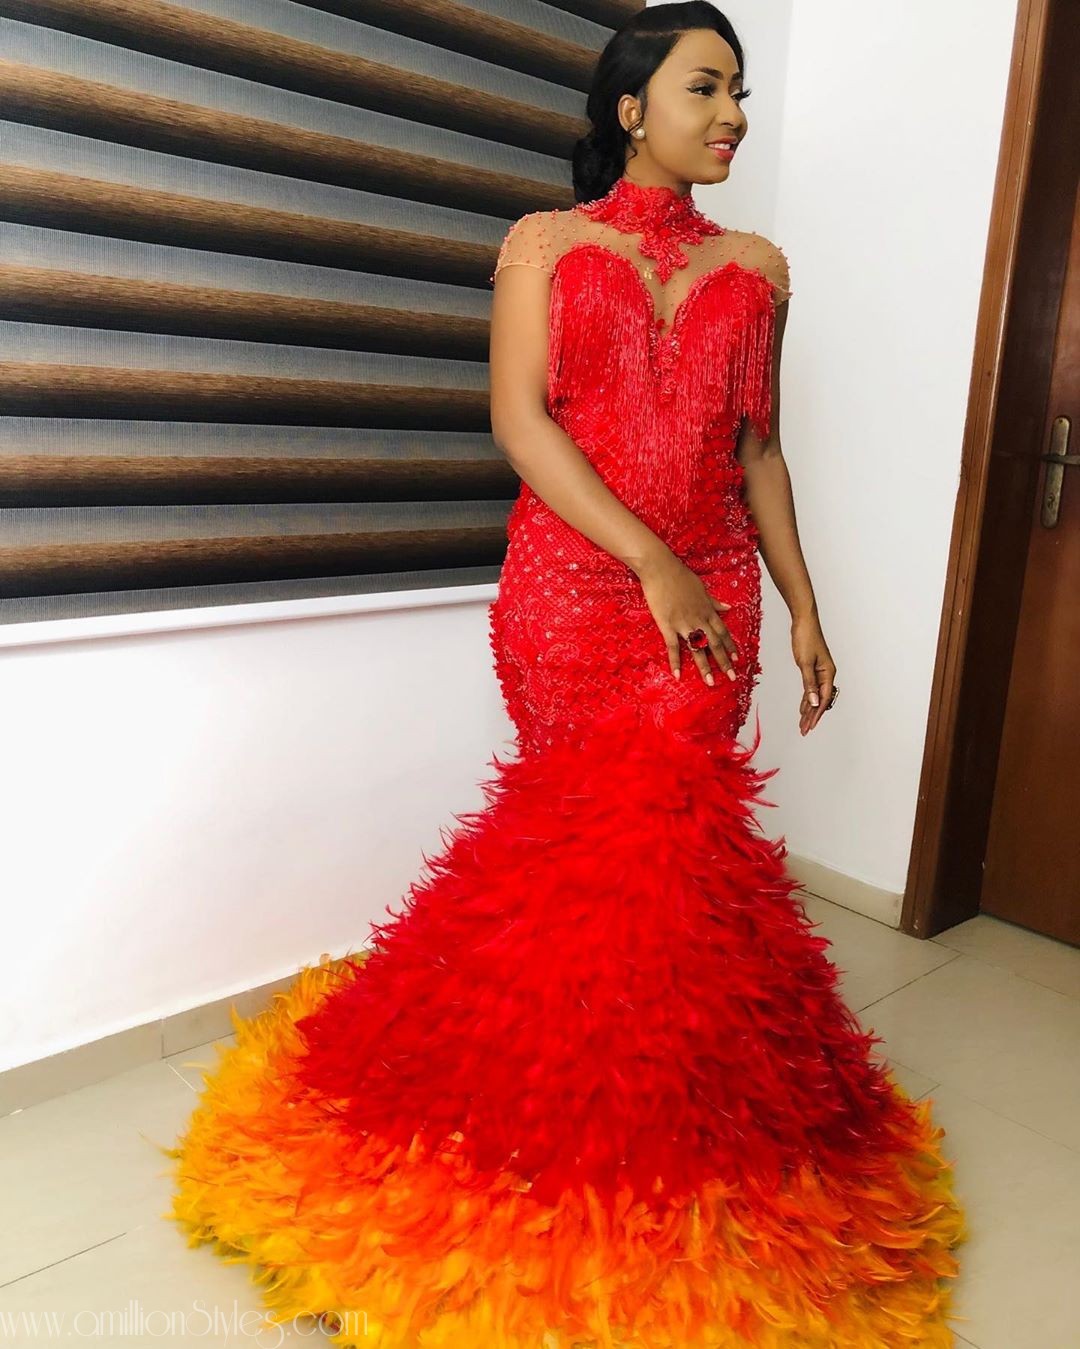 Our Favorite Looks From The AMAA 2019 Red Carpet